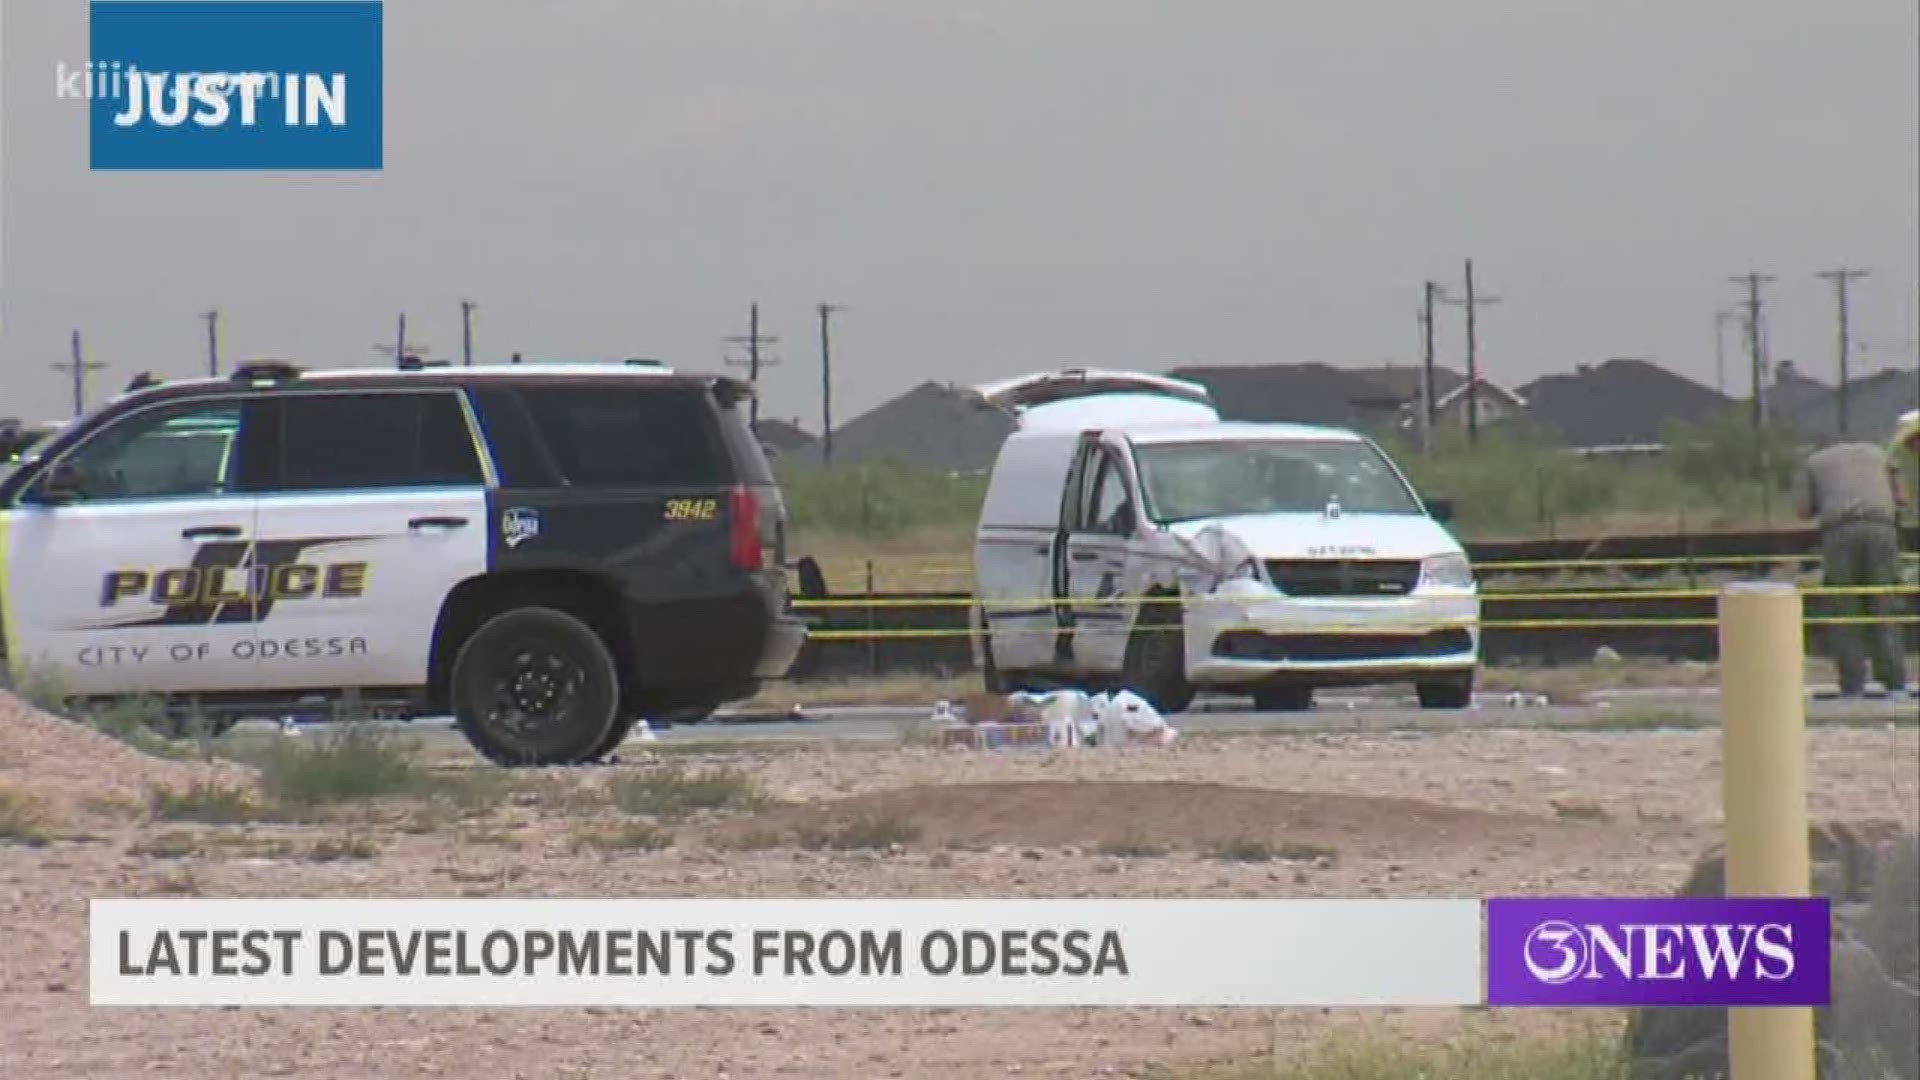 Donations and well wishes for the community have been pouring in for Odessa after a mass shooting.